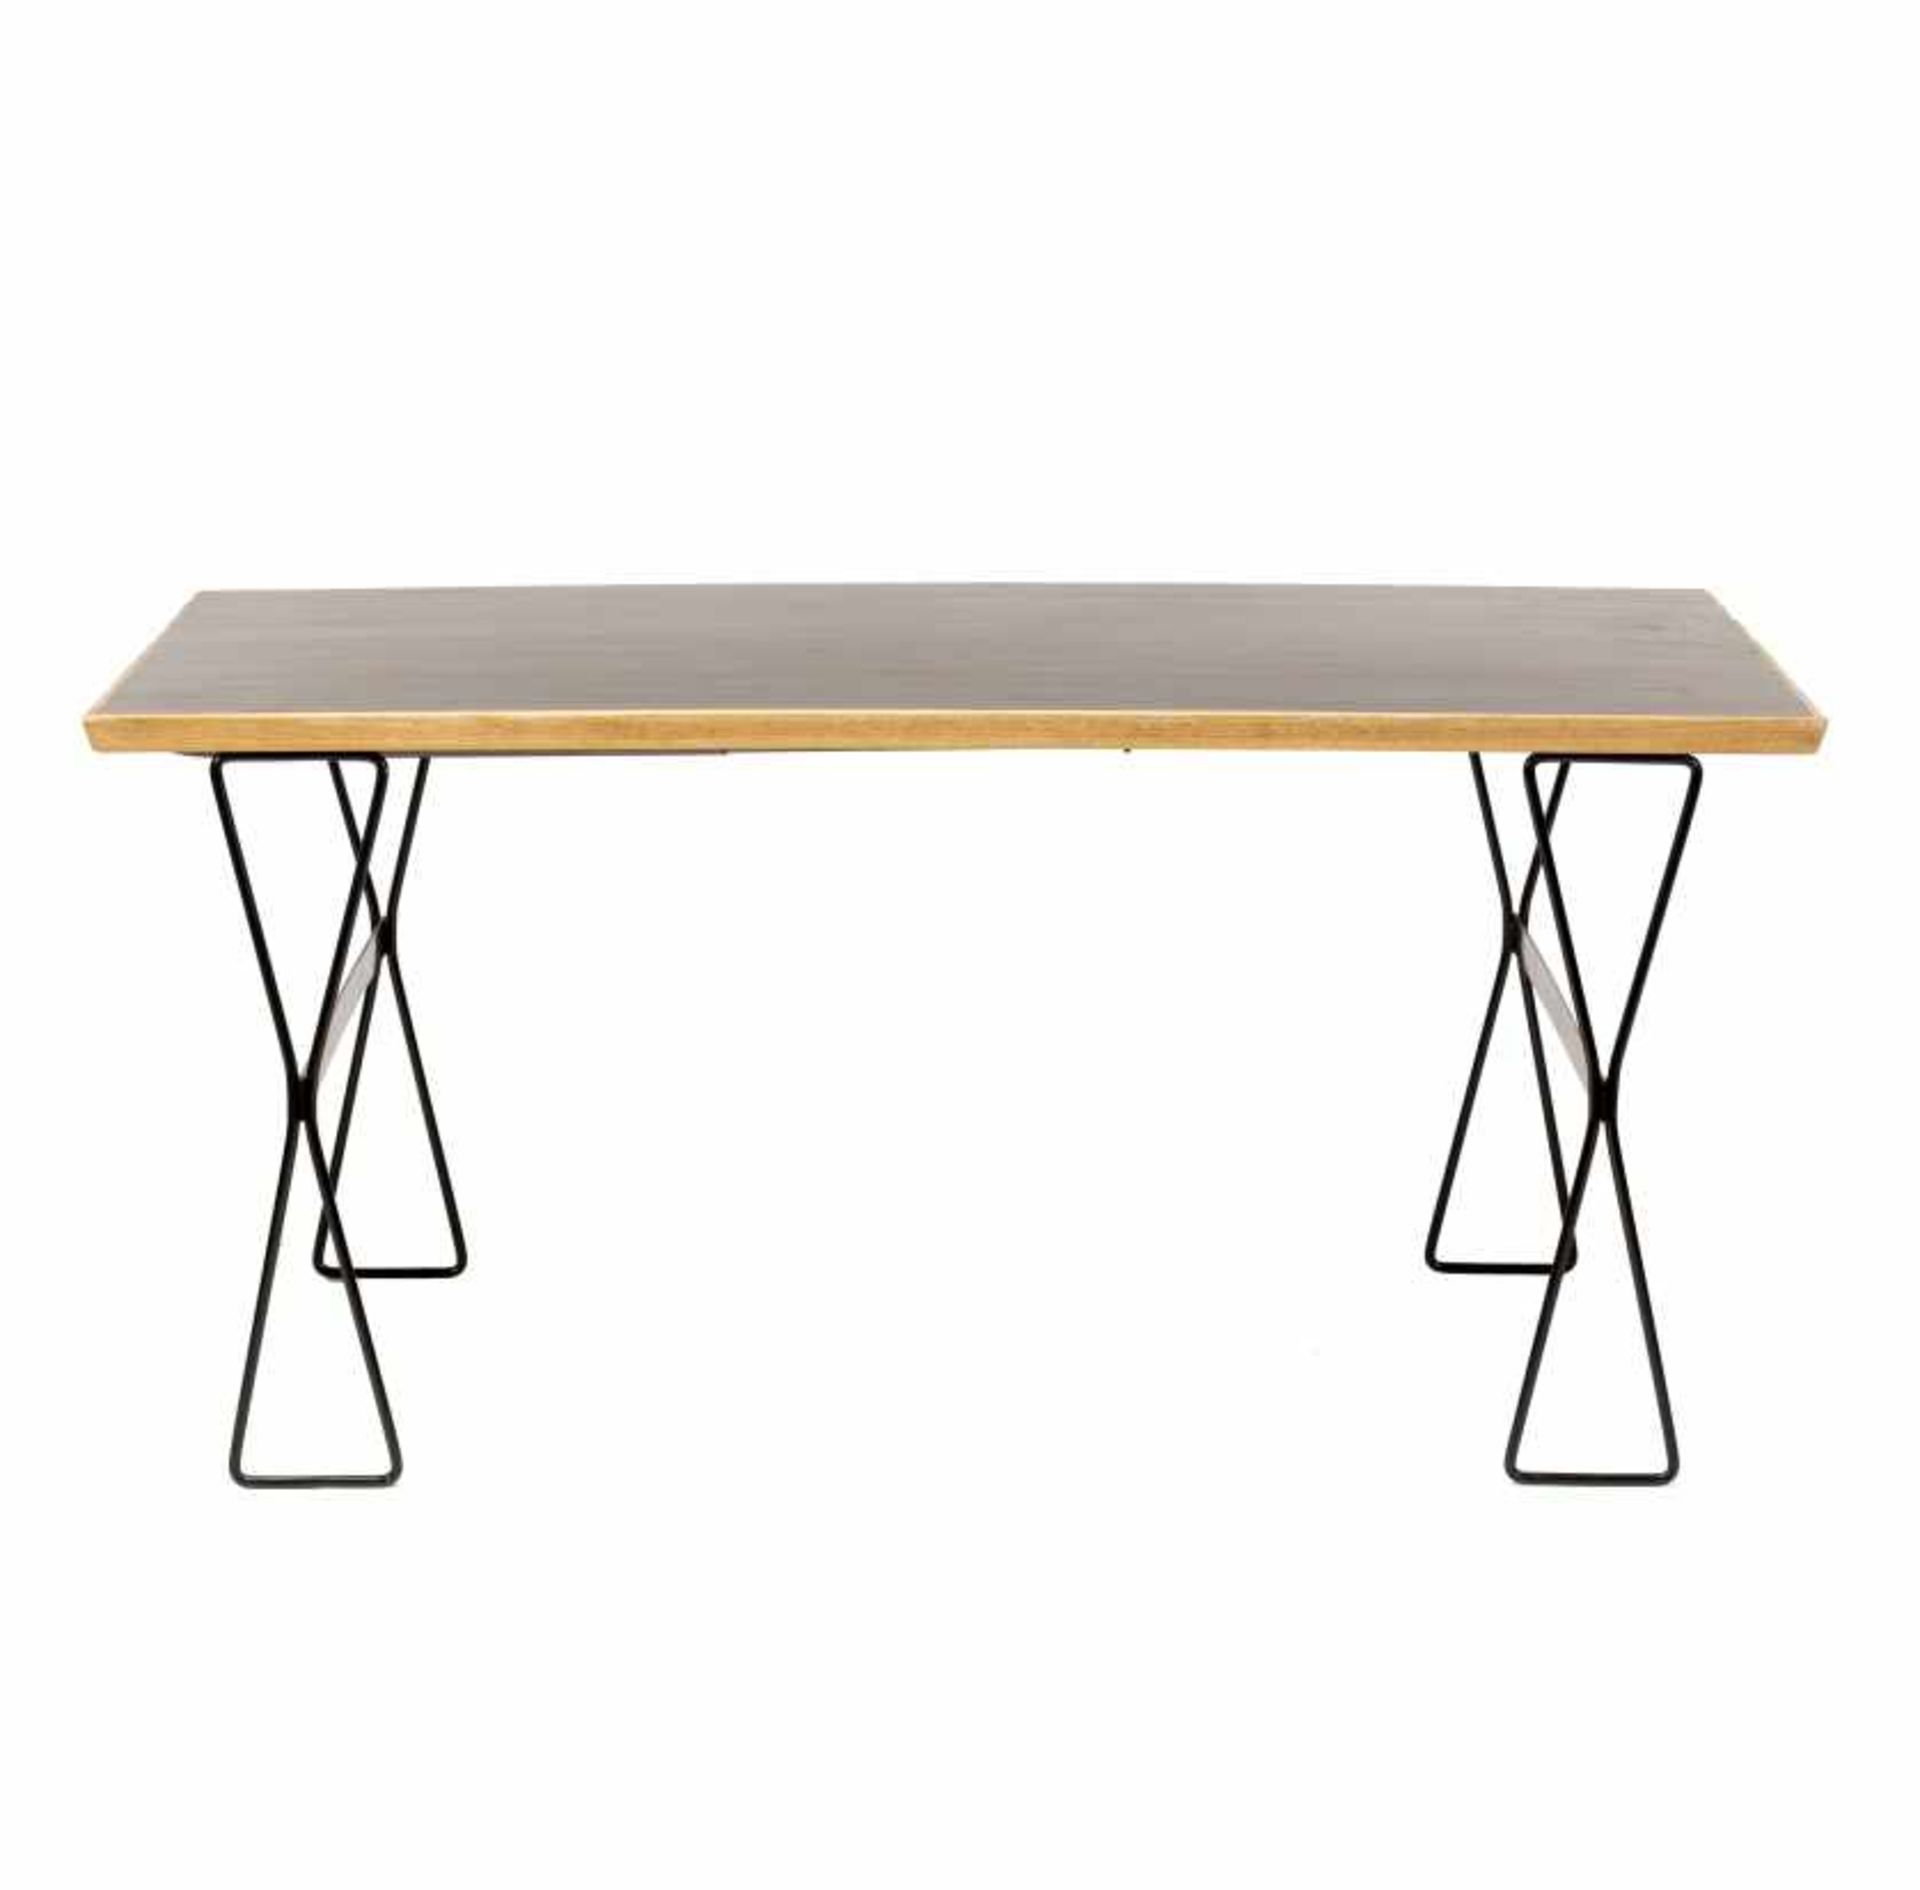 Dining table in oak, laminate and lacqured steel, circa 198Dining table in oak, laminate and